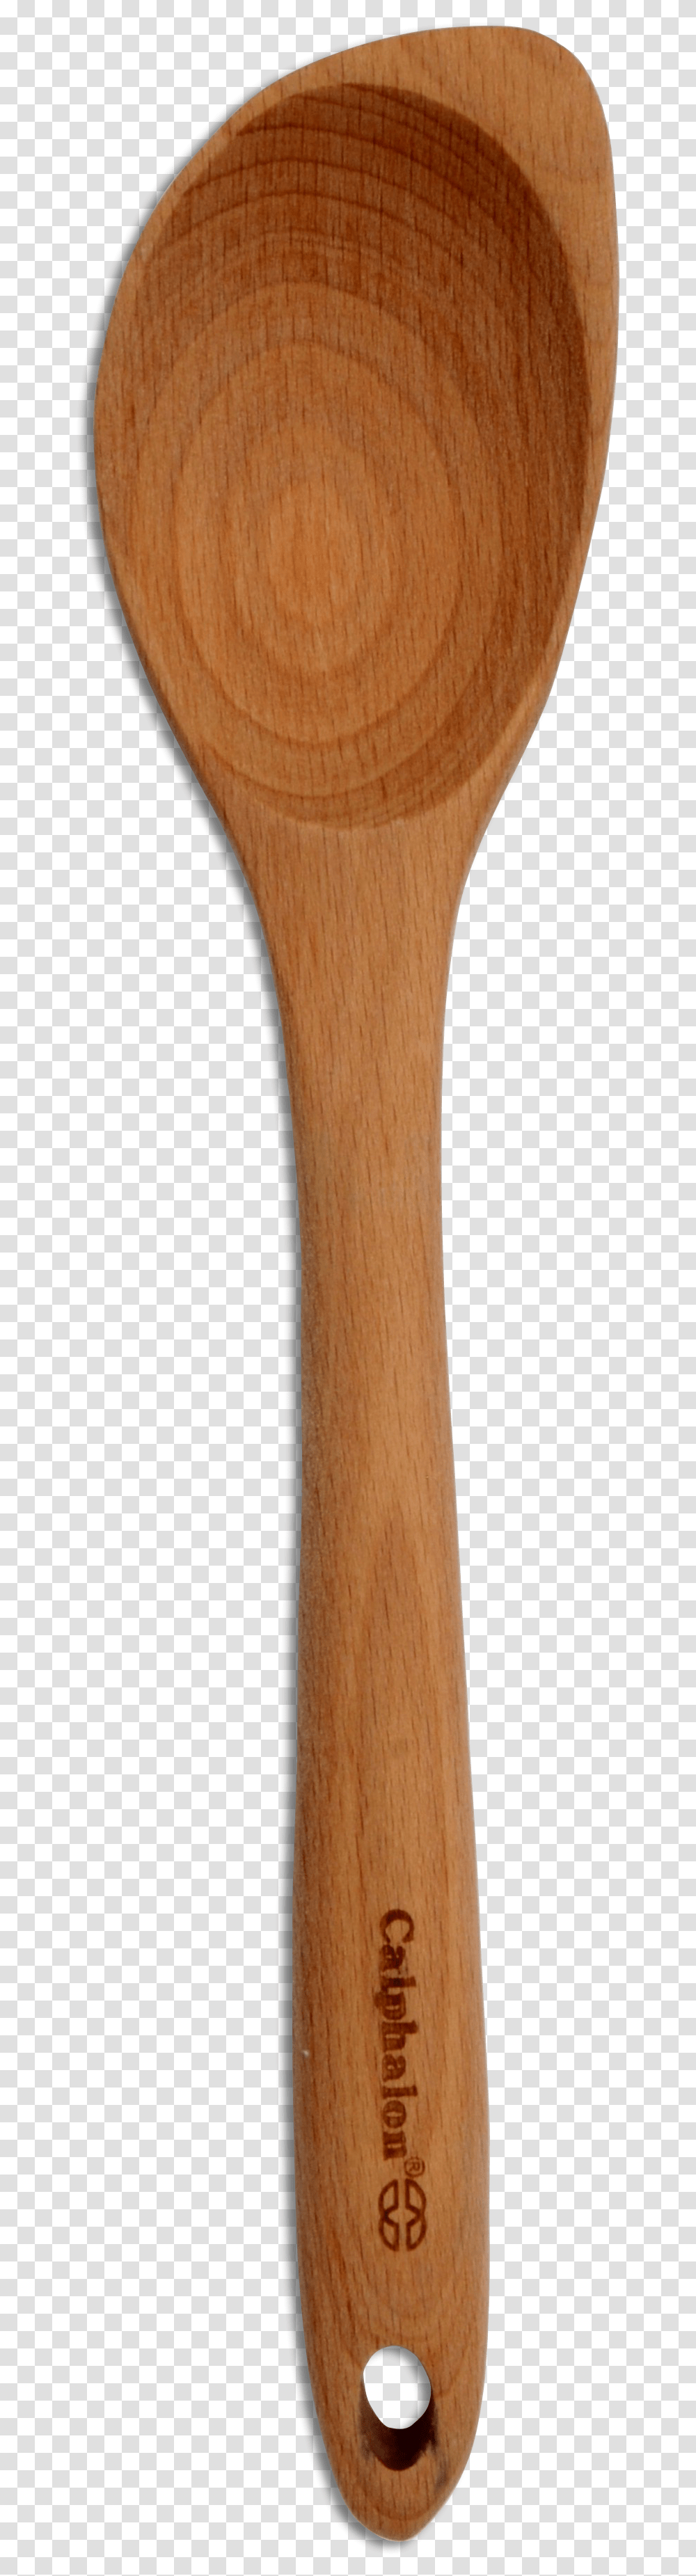 Calphalon Corner Spoon Brown Wooden Spoon, Cutlery, Tool, Fork, Pillow Transparent Png